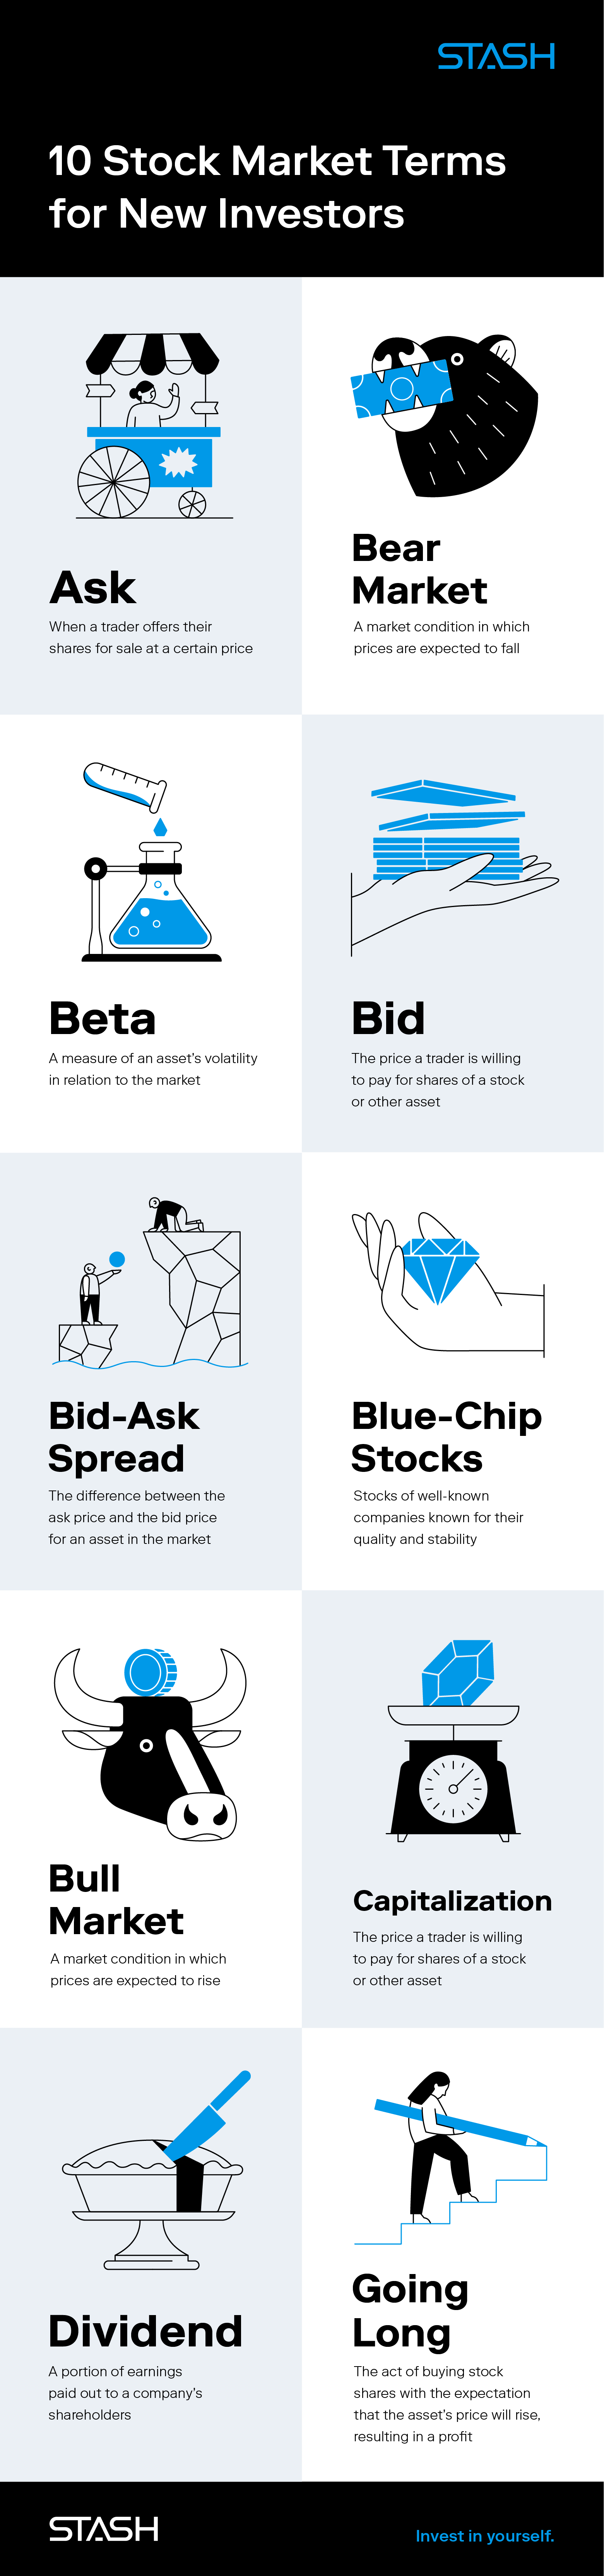 10 illustrations accompany 10 stock terms and definitions. 